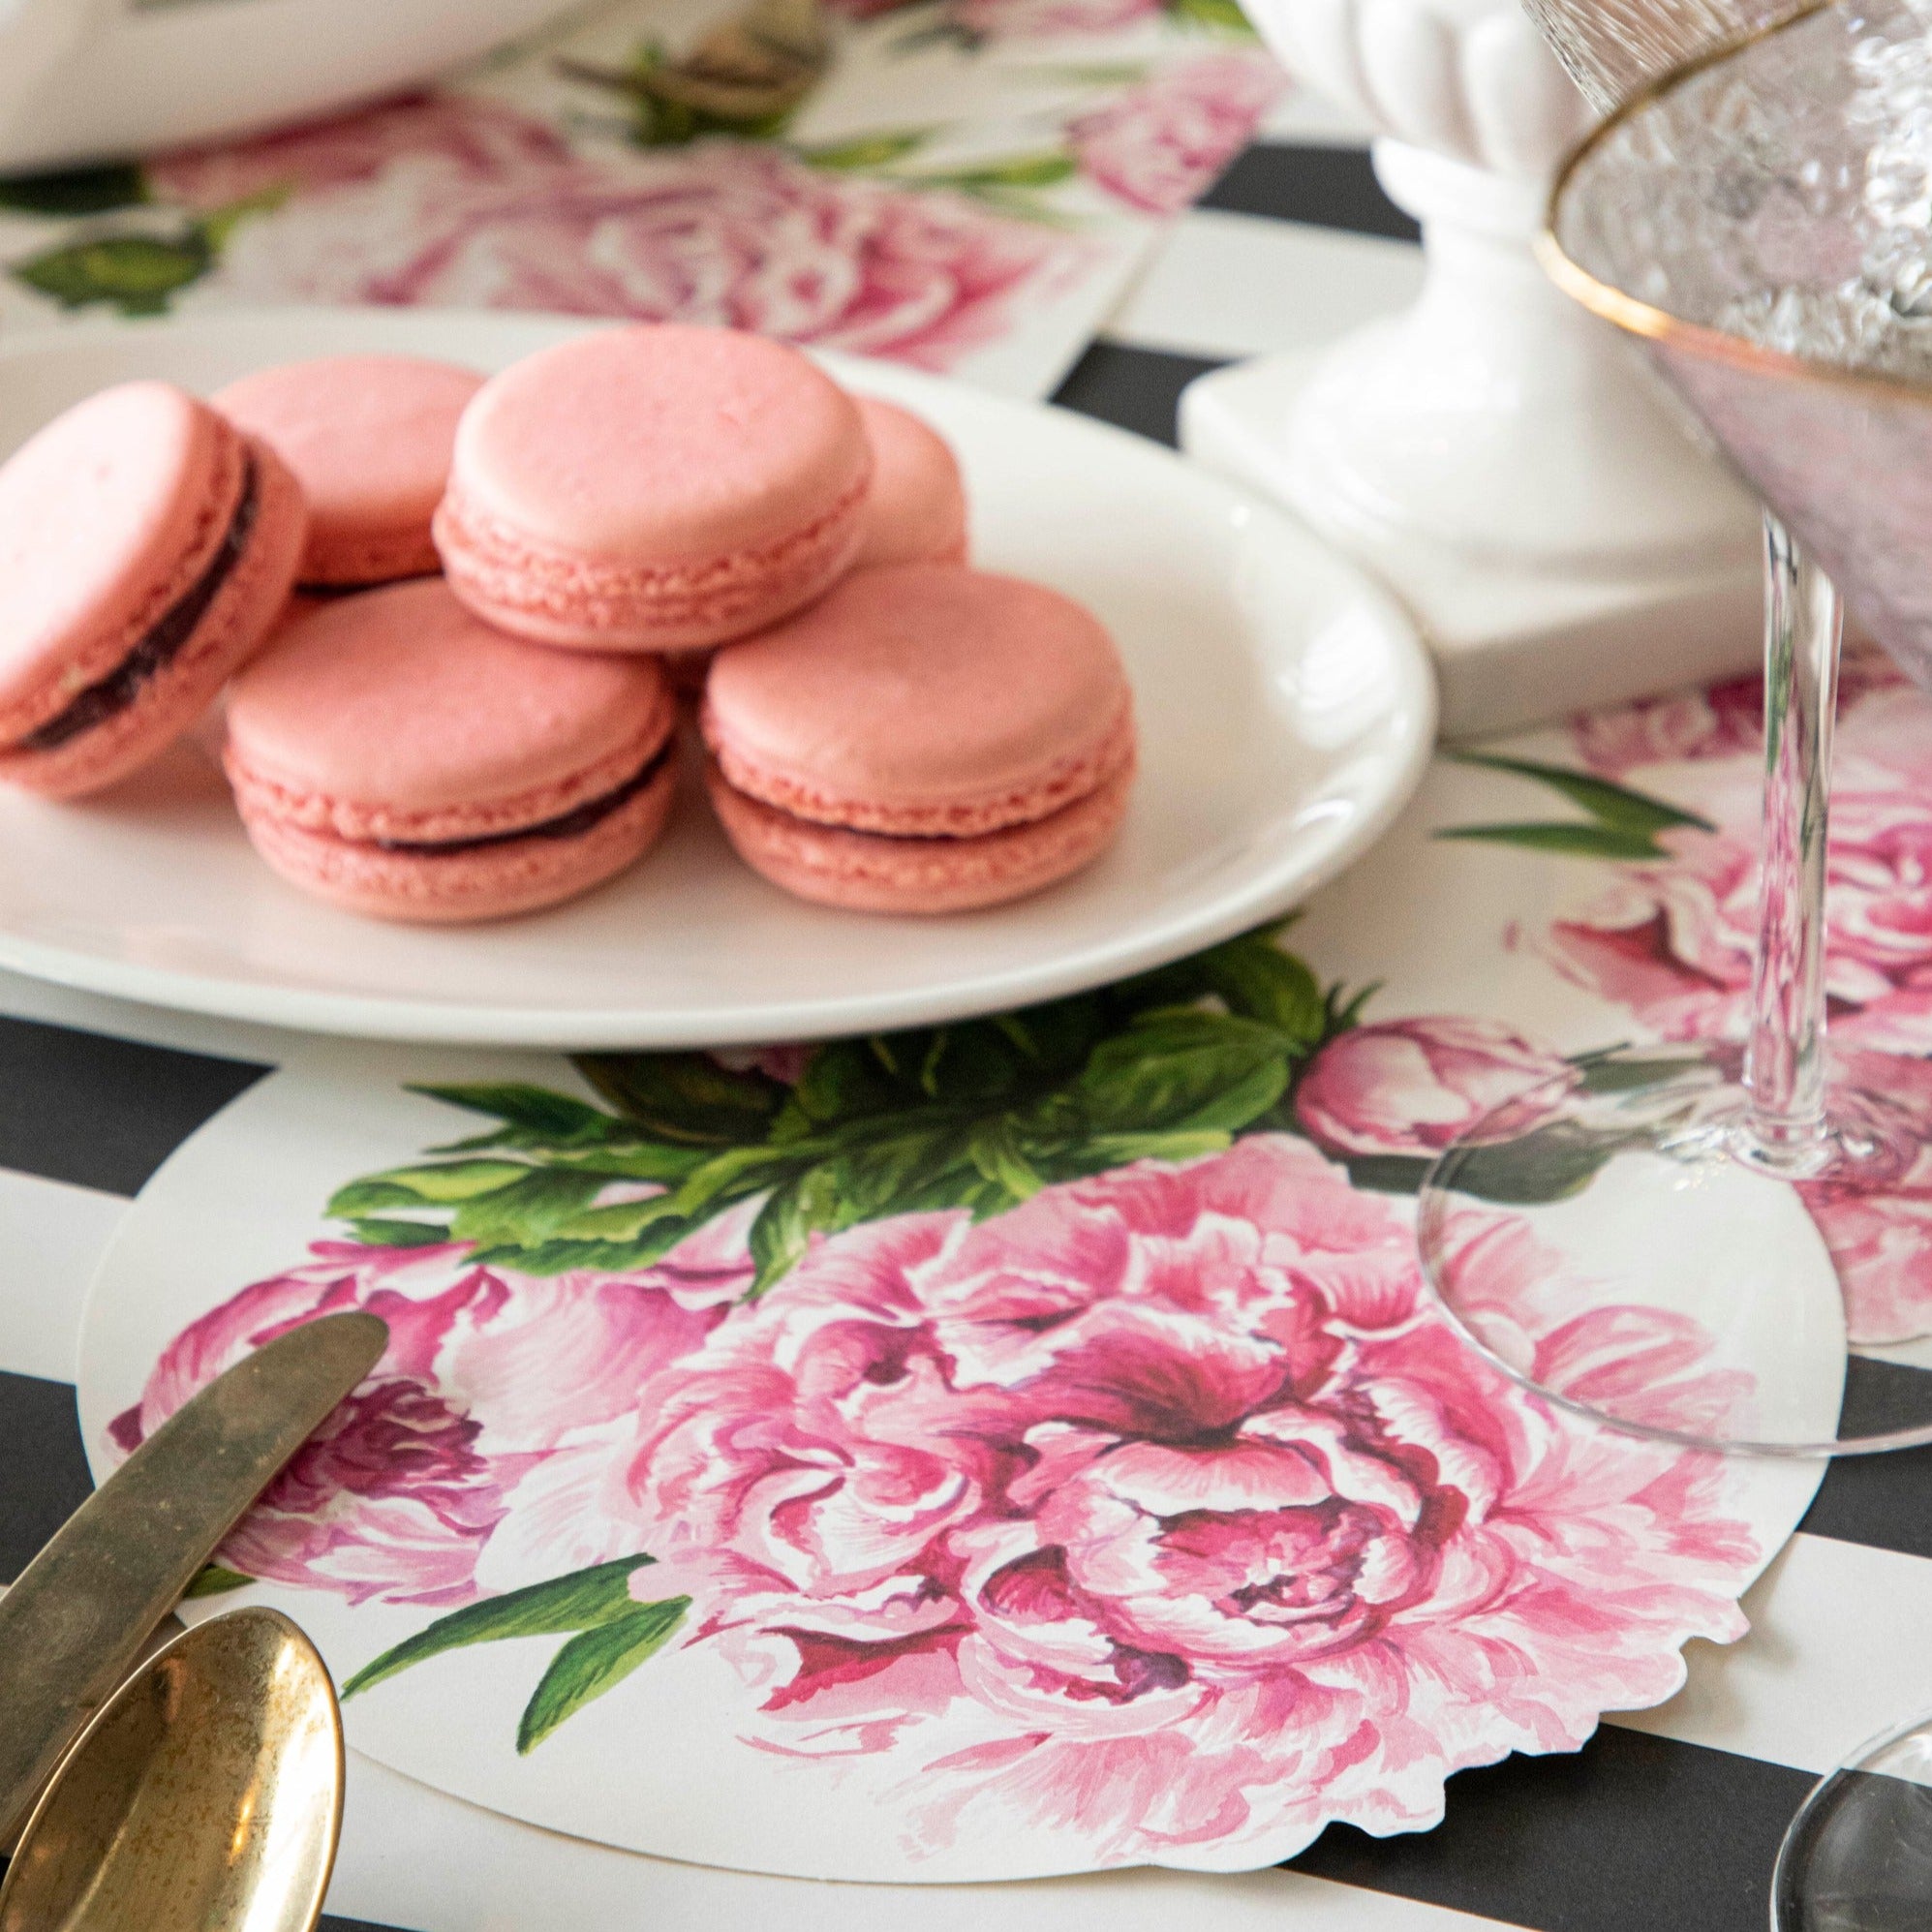 A plate of pink macaroons with a Peony Serving Paper tucked under it on an elegant floral table setting.